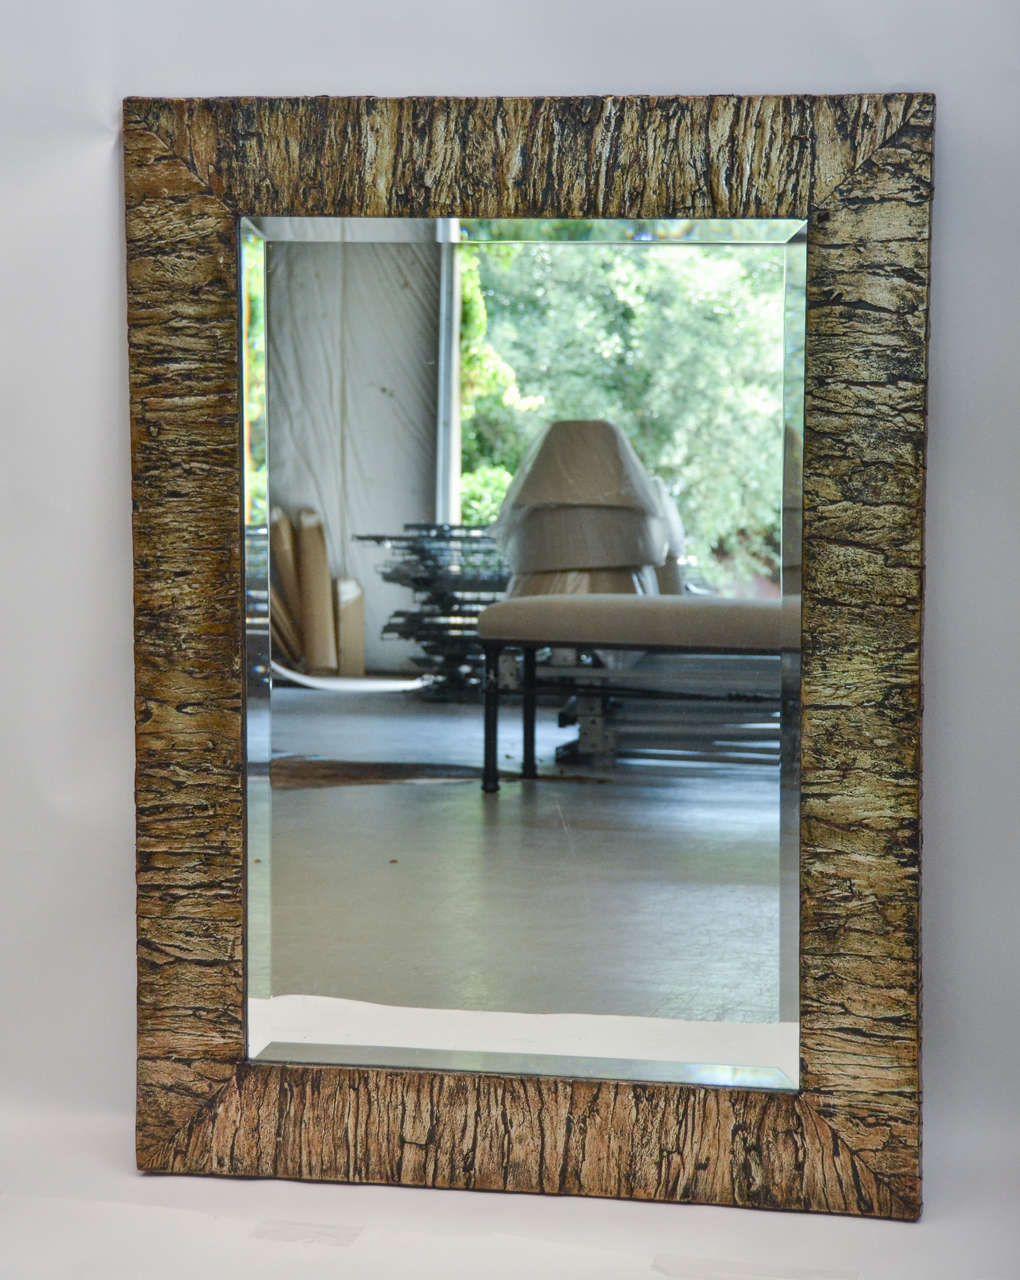 Mica Bark mirror with discreet flecks of gold enlivening the sealed frame of beveled mirror glass.